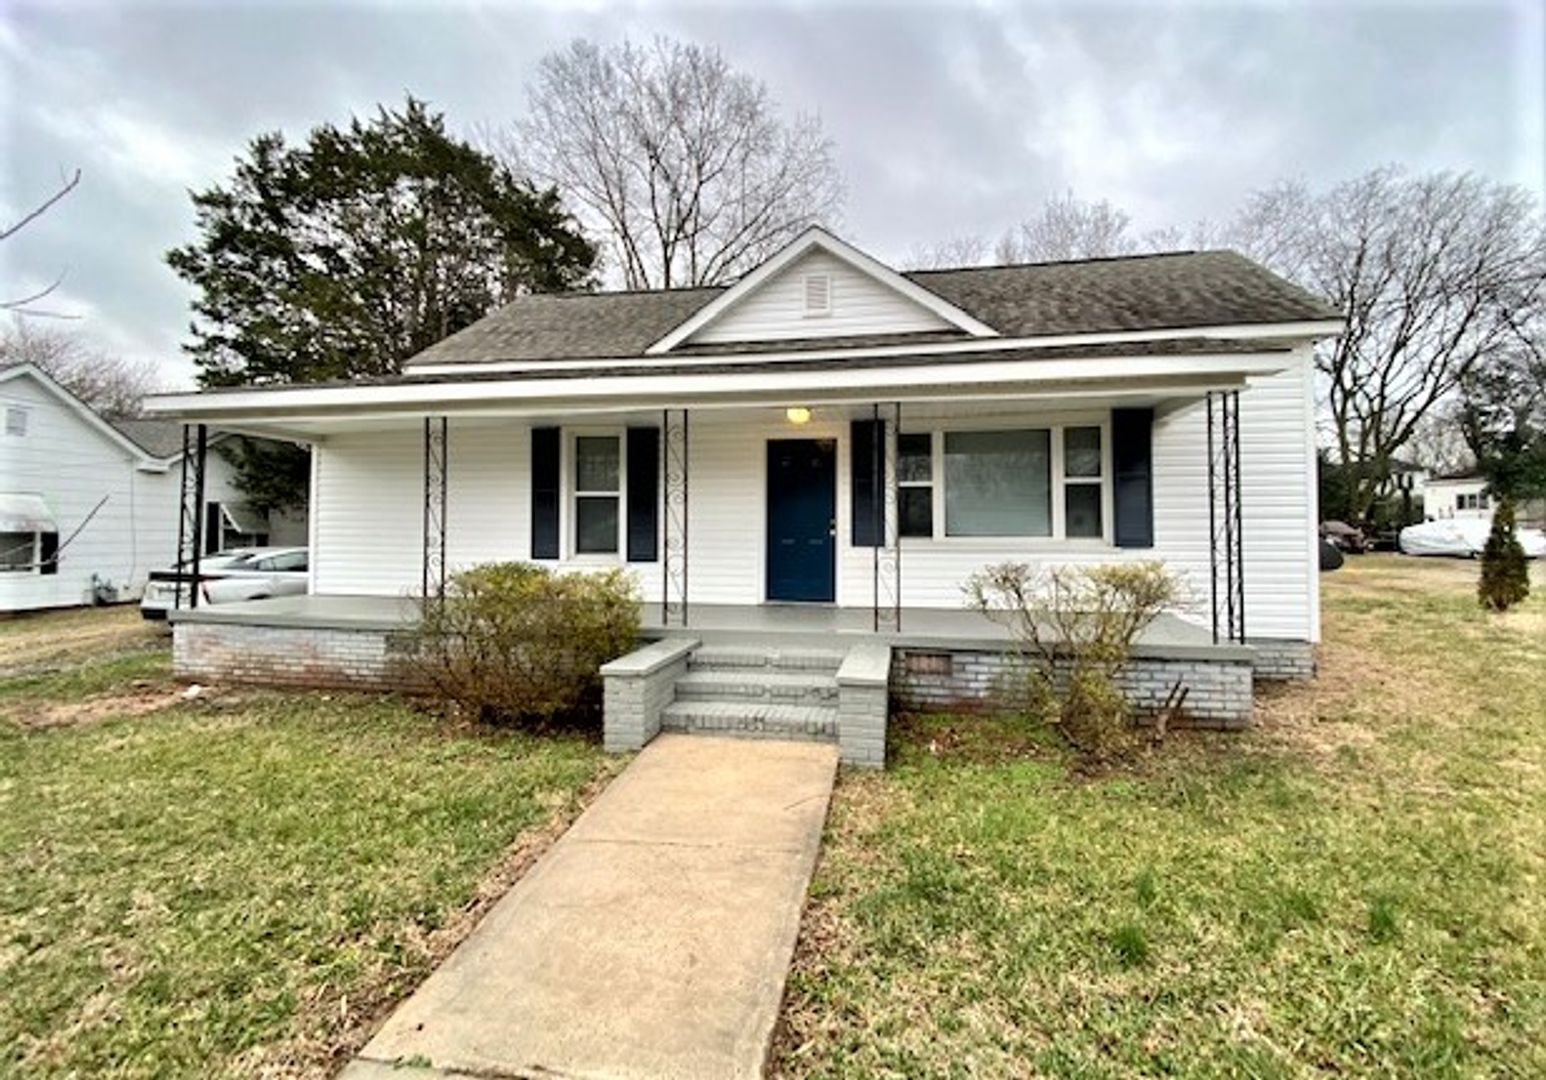 Updated- 3 bed, 2bath Bungalow near downtown Kannapolis